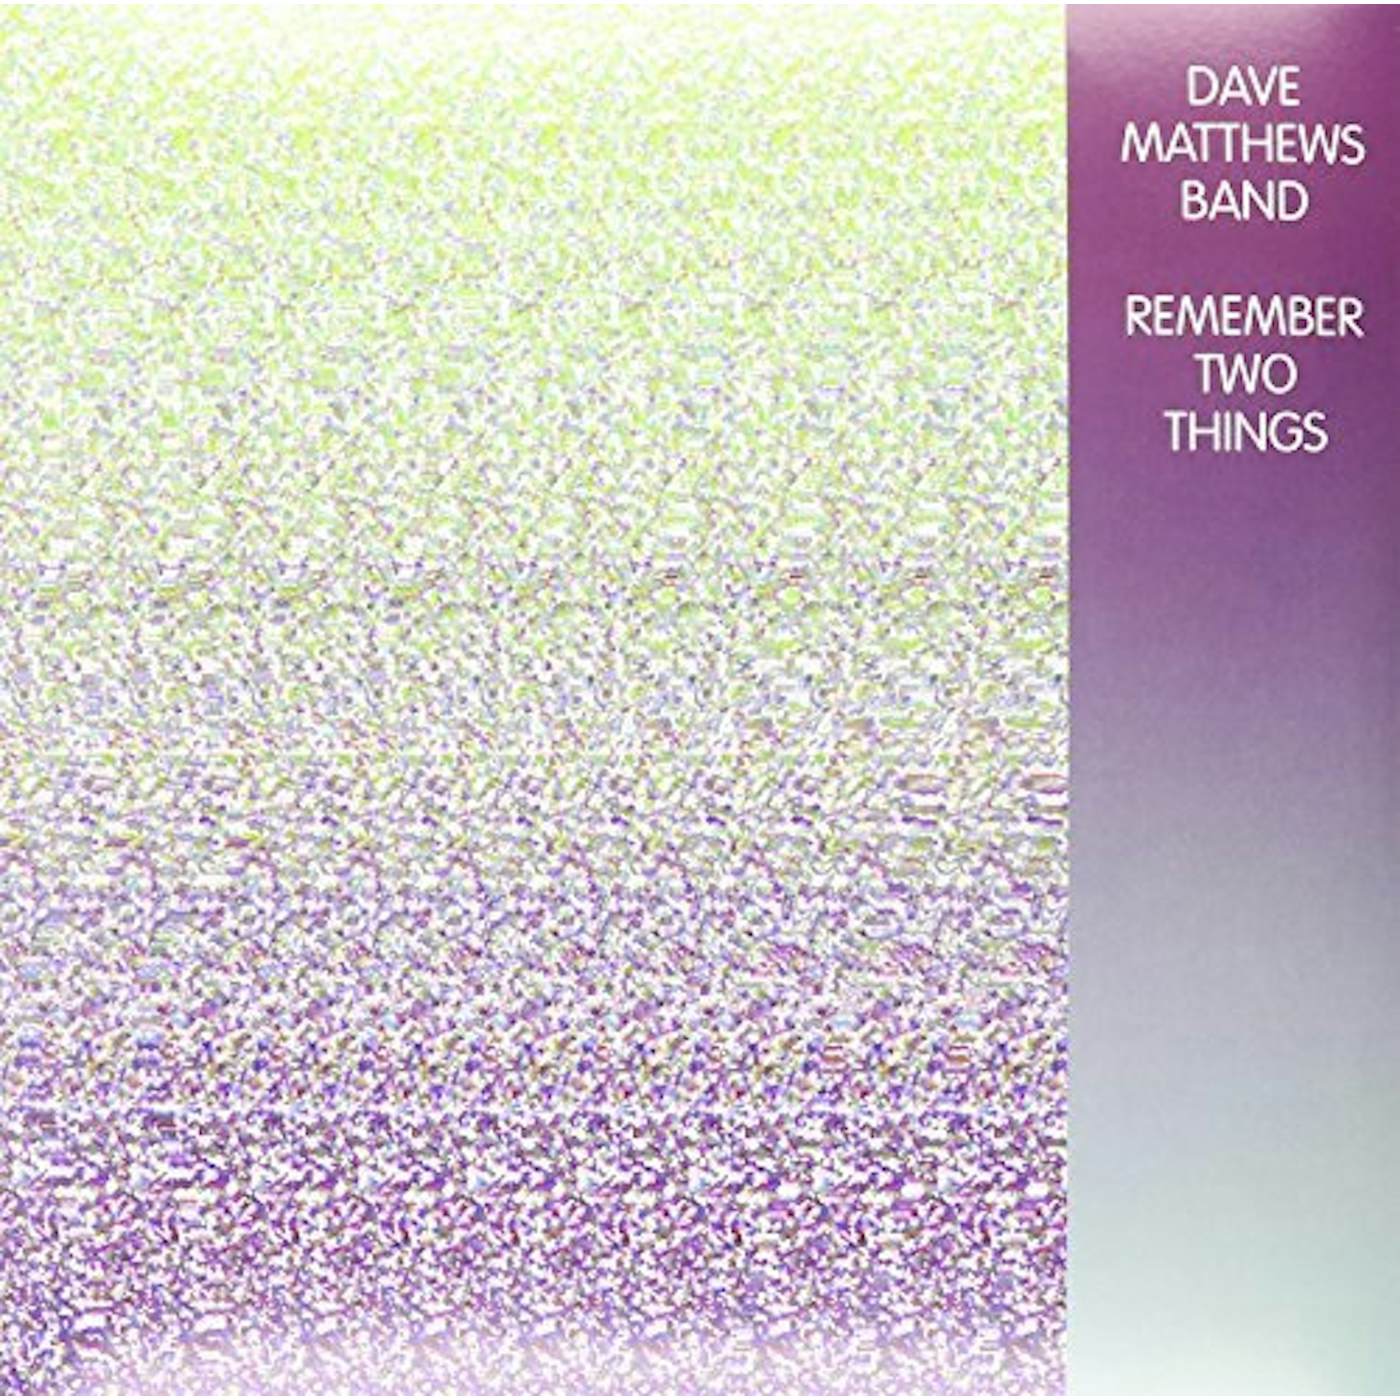 Dave Matthews Band Remember Two Things Vinyl Record